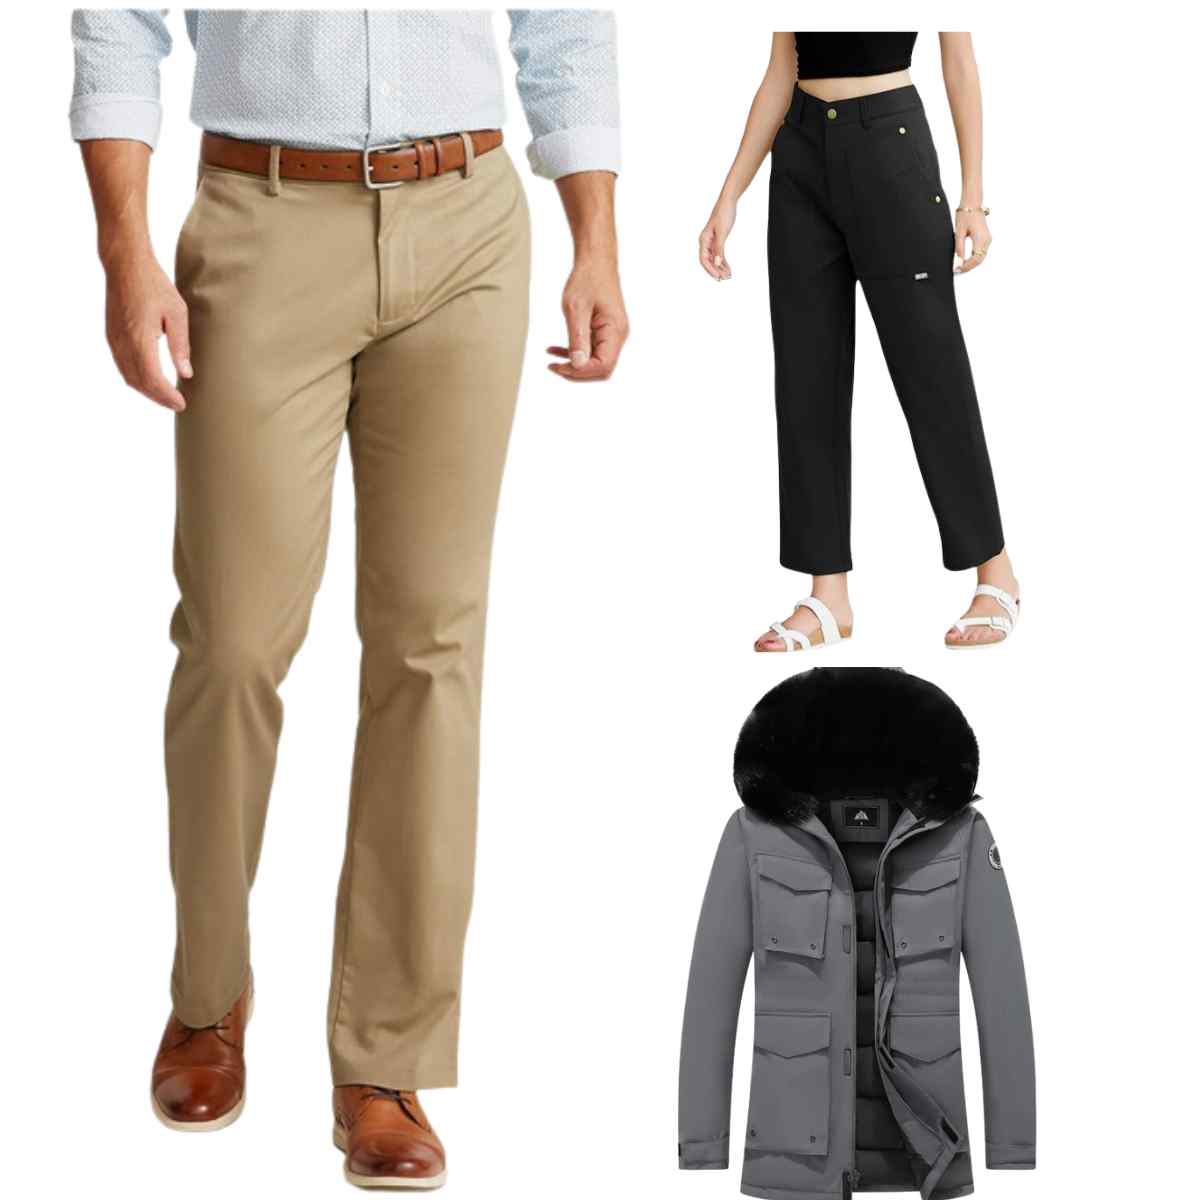 Women's cargo pants, $14+ | Men's jackets, $13+ | Br@Nded cotton ...